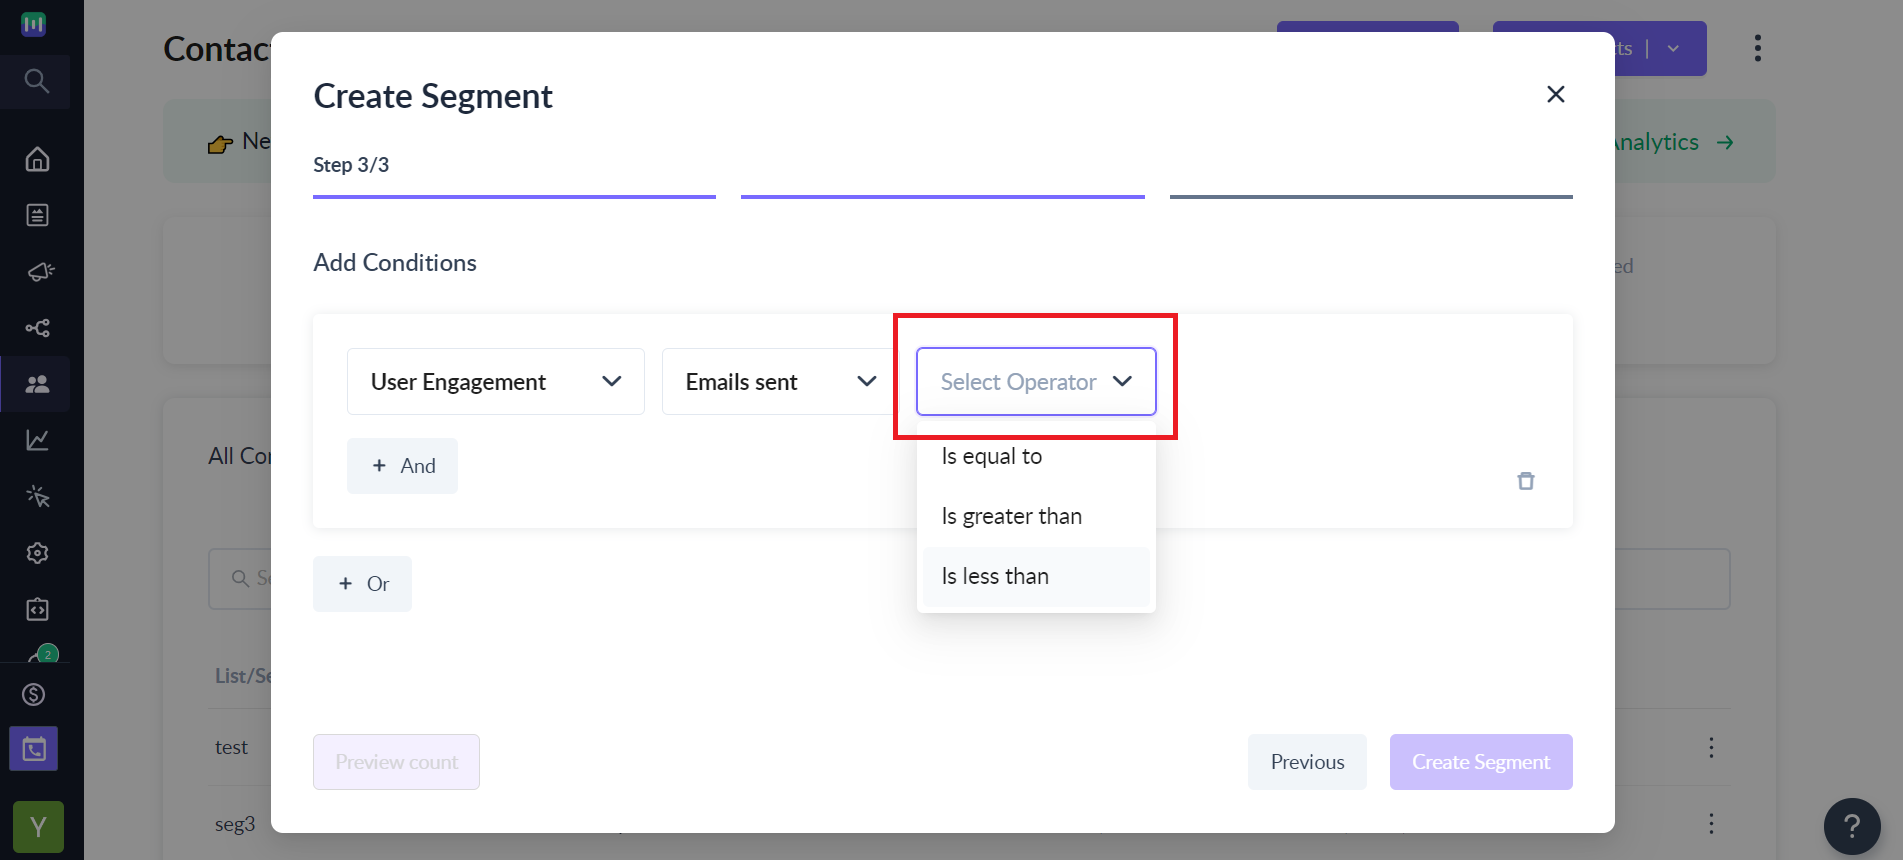 How to segment contacts based on 'User Engagement'?